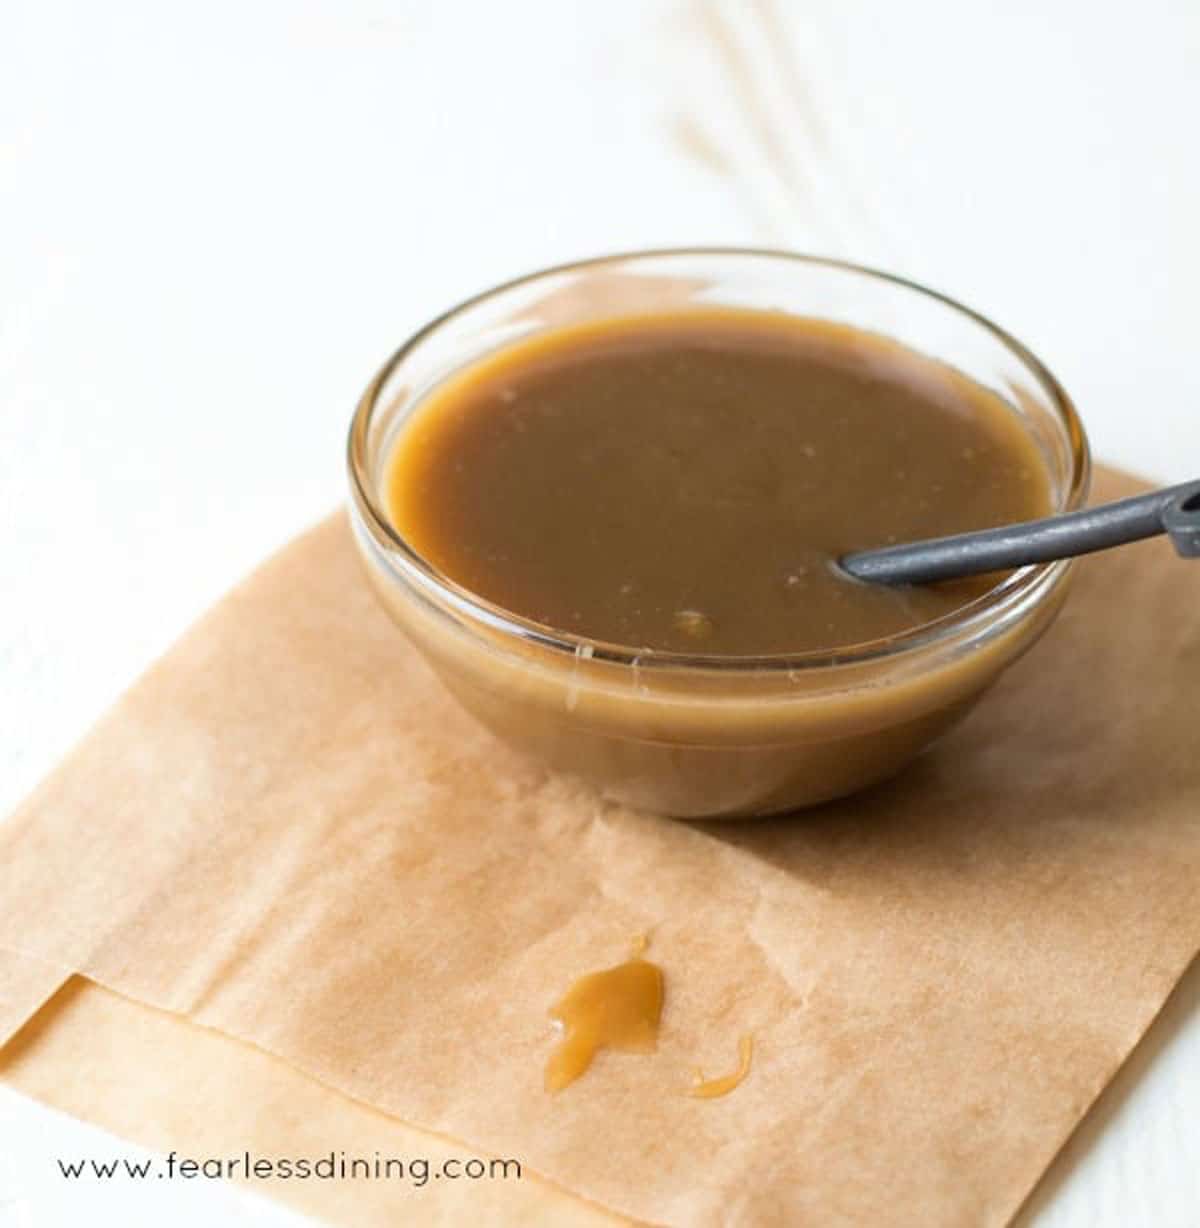 A small glass bowl filled with butterscotch sauce.